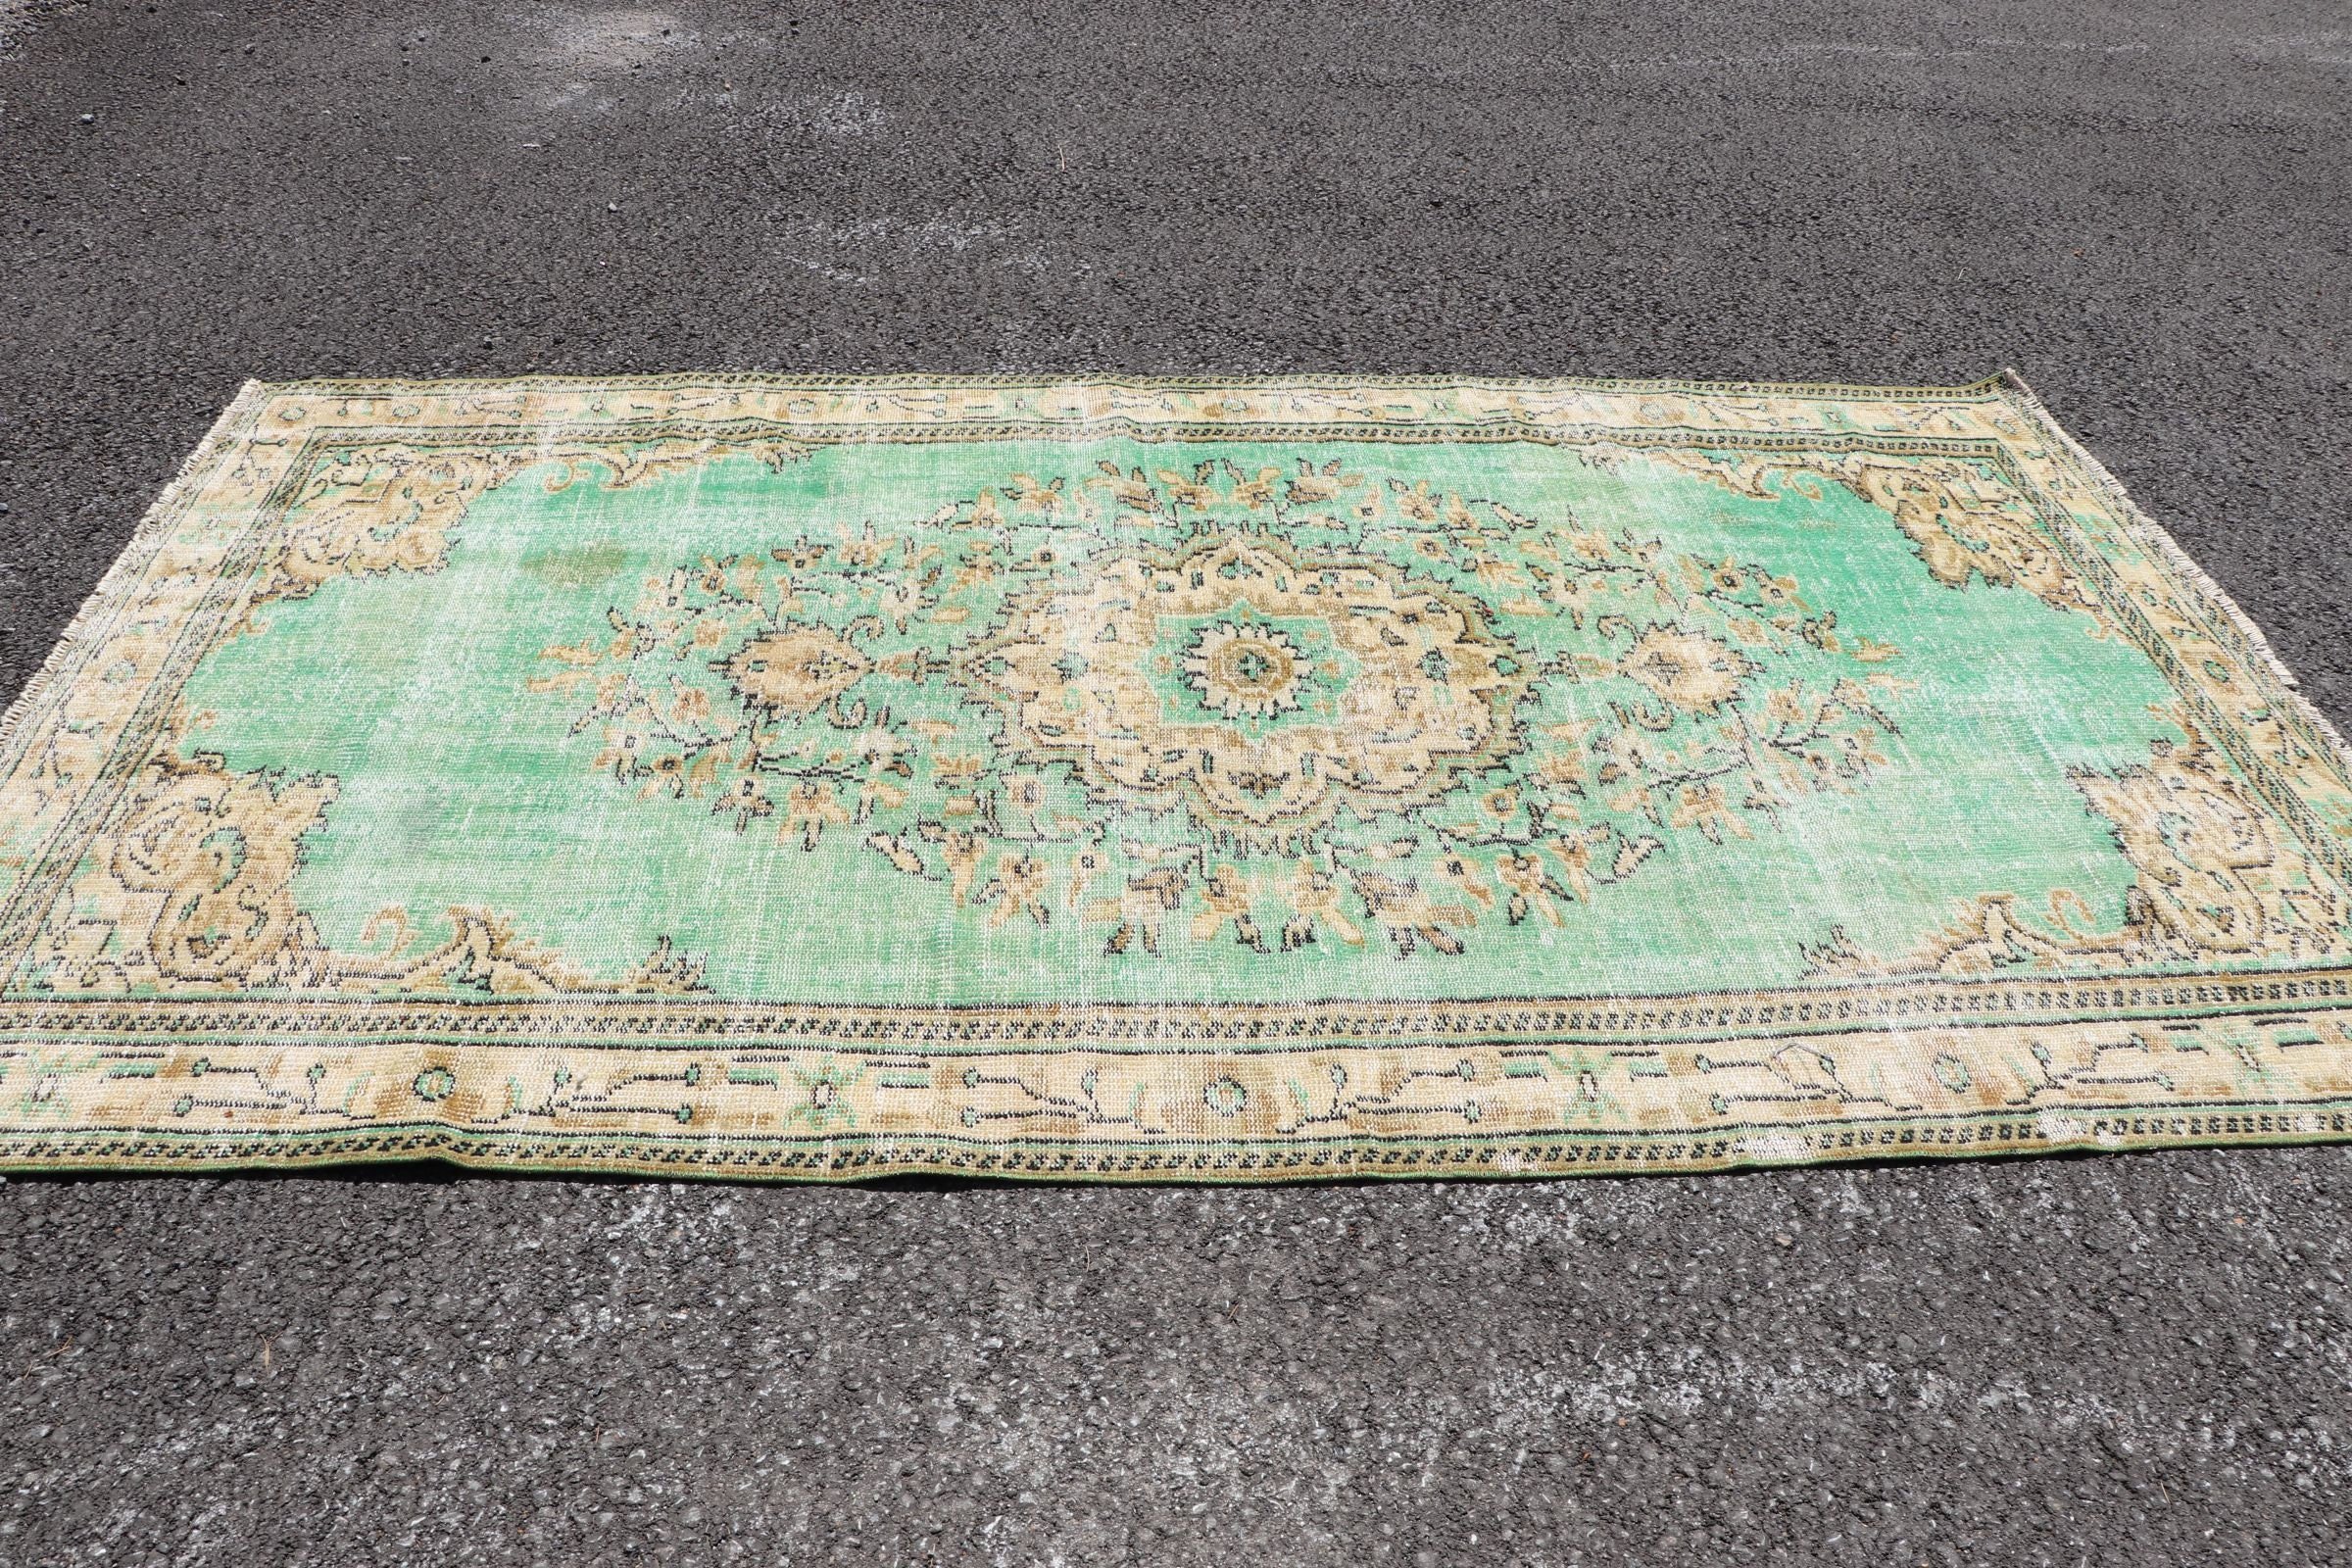 Turkish Rugs, Living Room Rugs, Vintage Rug, Wool Rugs, Green Home Decor Rug, Hand Woven Rug, Antique Rug, Salon Rug, 5.2x9.3 ft Large Rugs